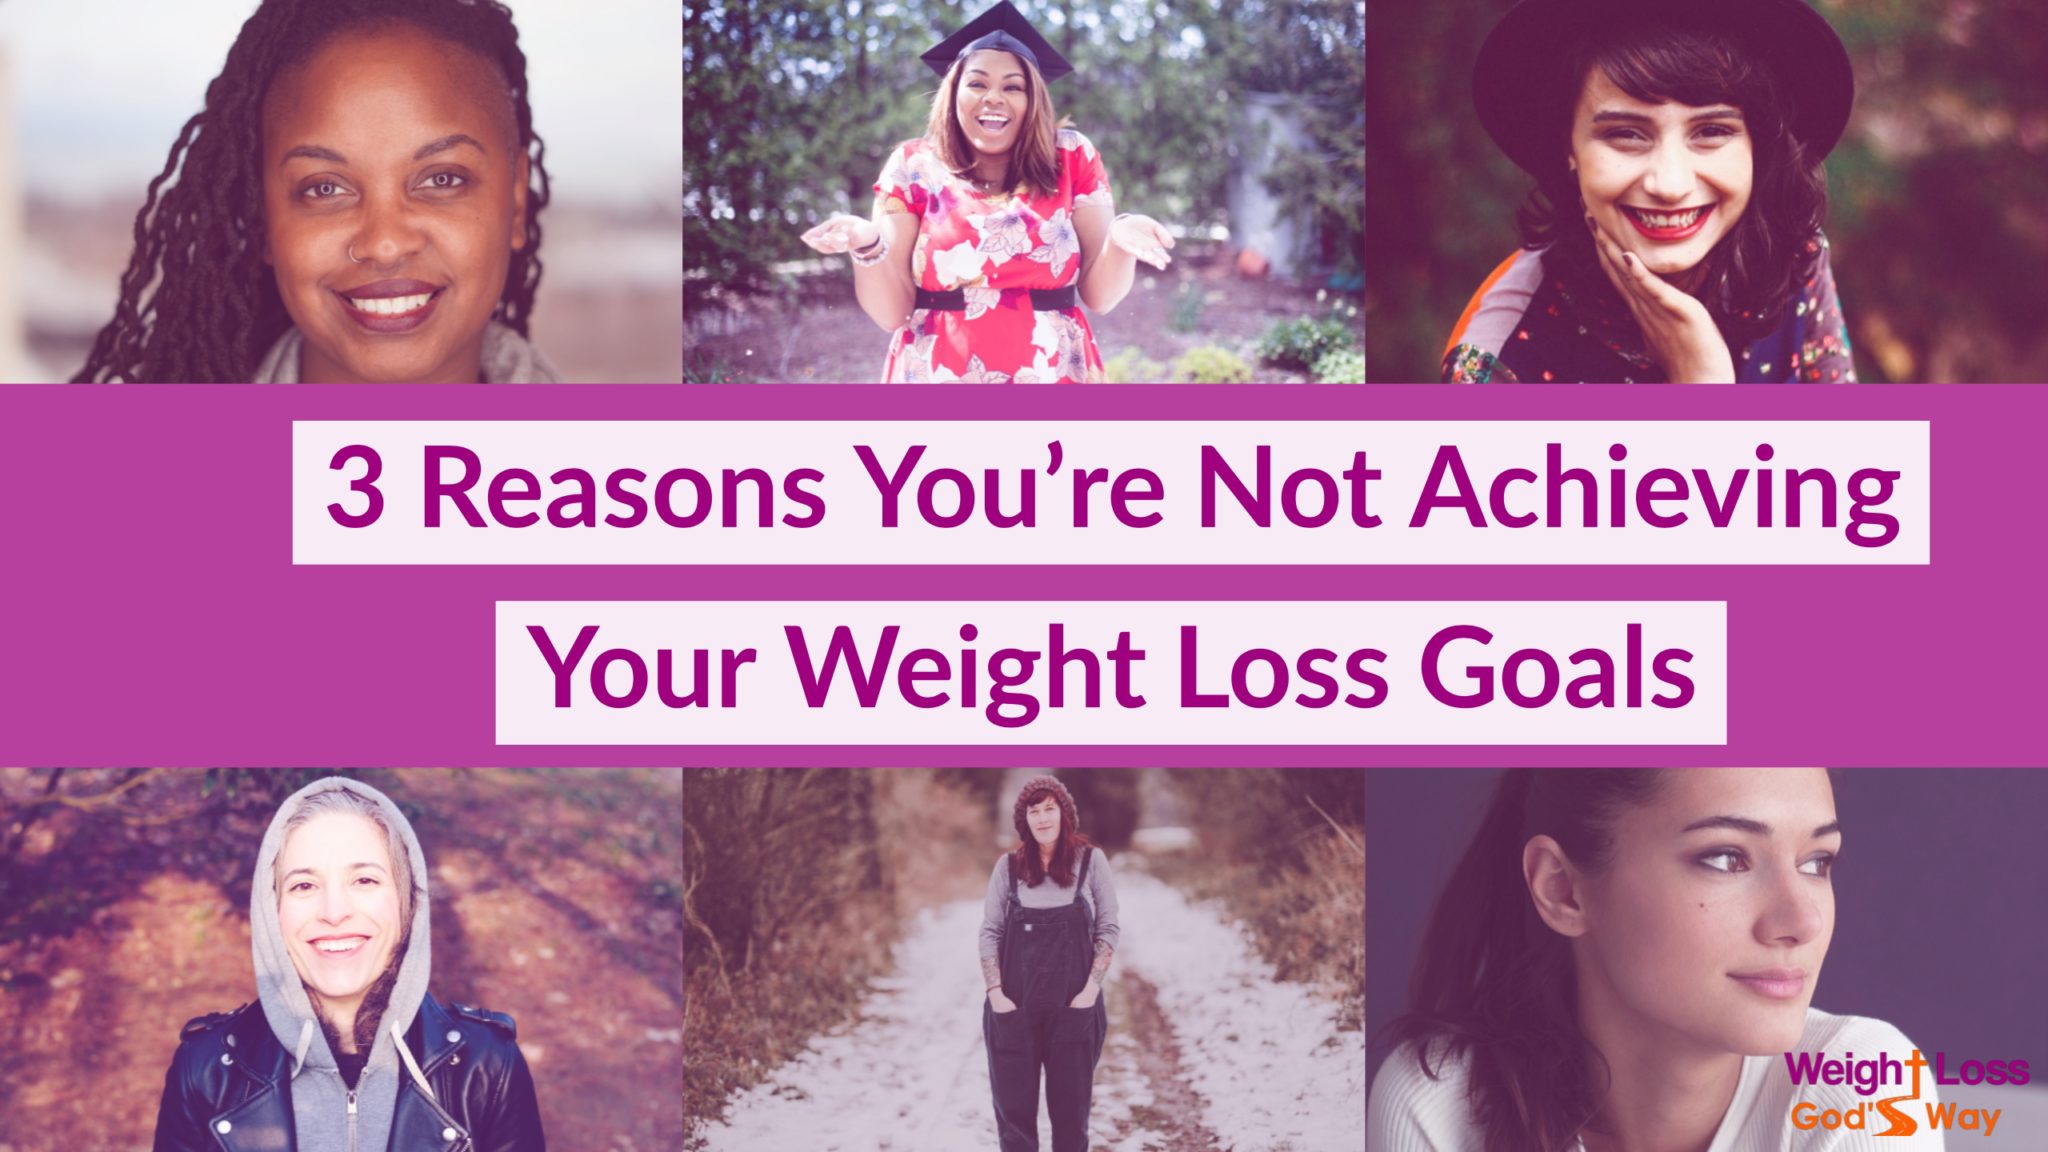 Let’s Get Real—3 Reasons You’re Not Achieving Your Weight Loss Goals